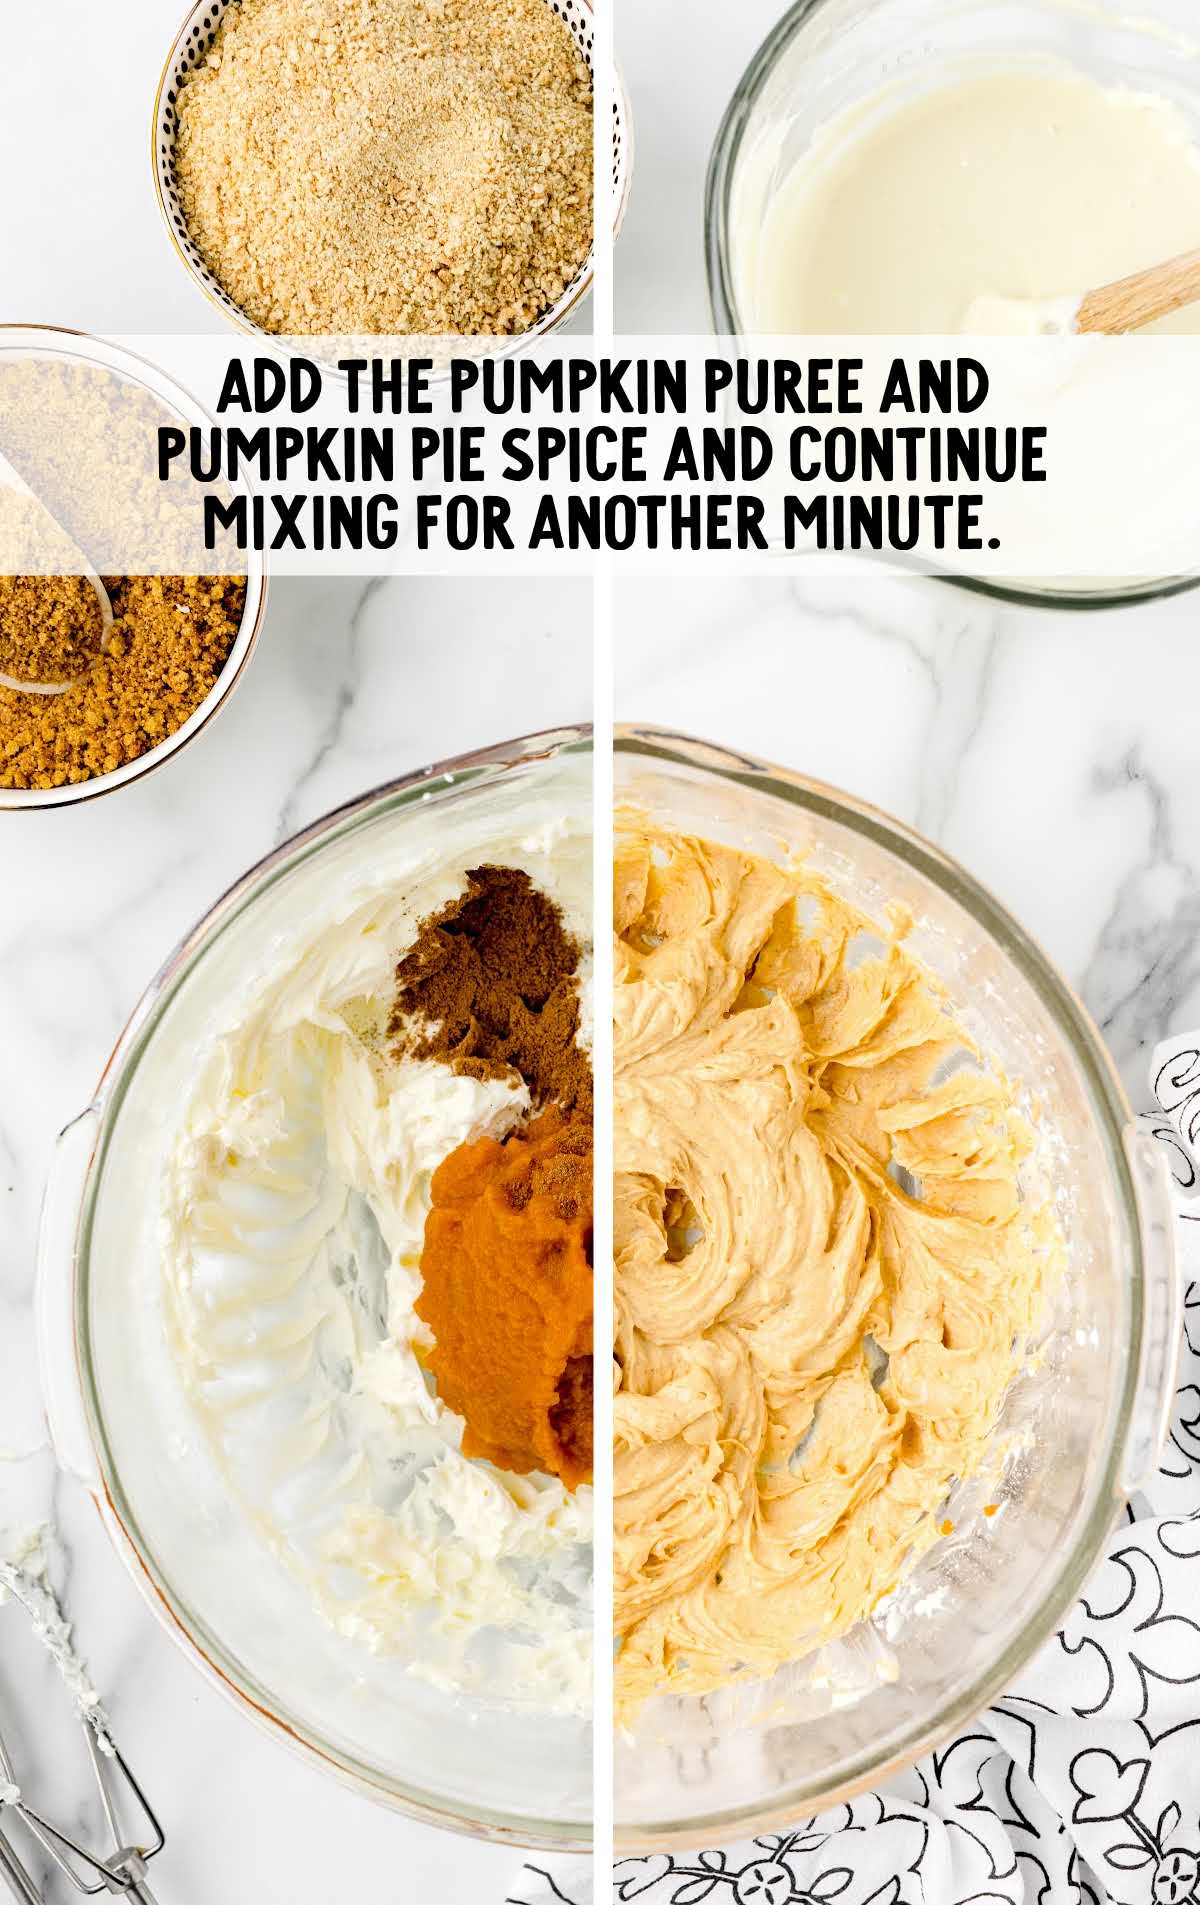 pumpkin puree and pumpkin pie spice added to the white chocolate in a bowl